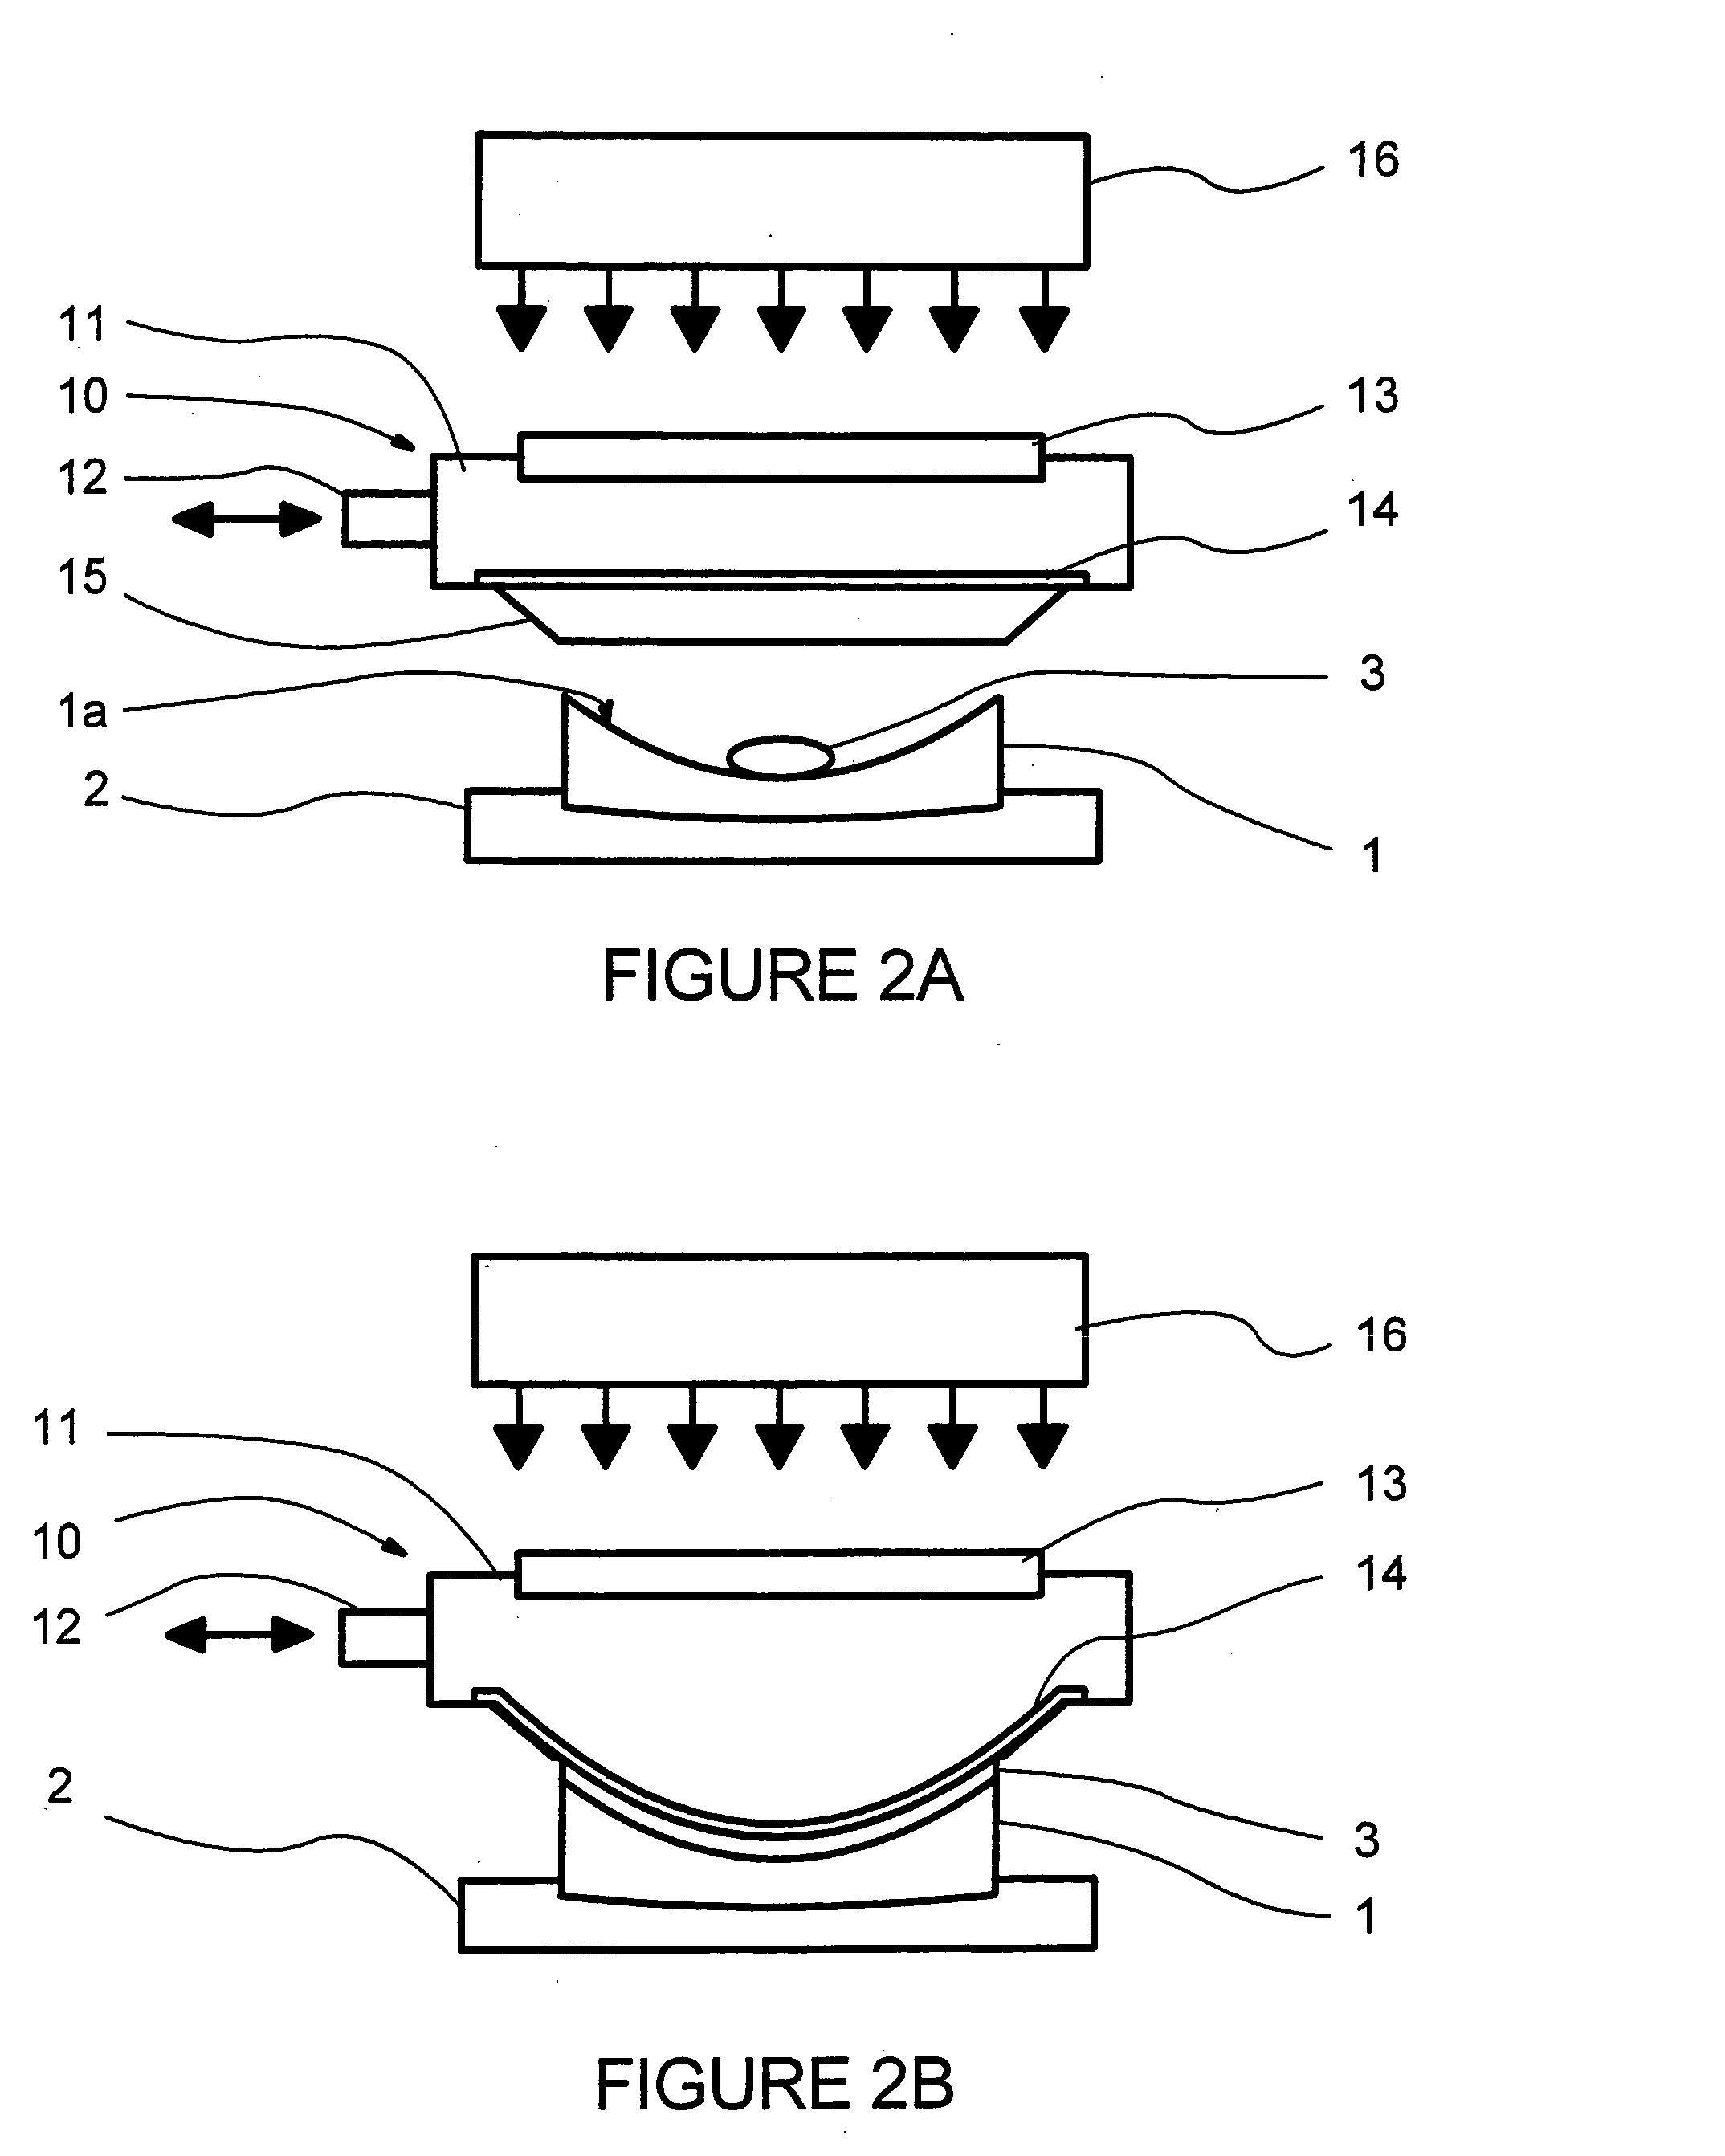 Process for making a coated optical article free of visible fining lines